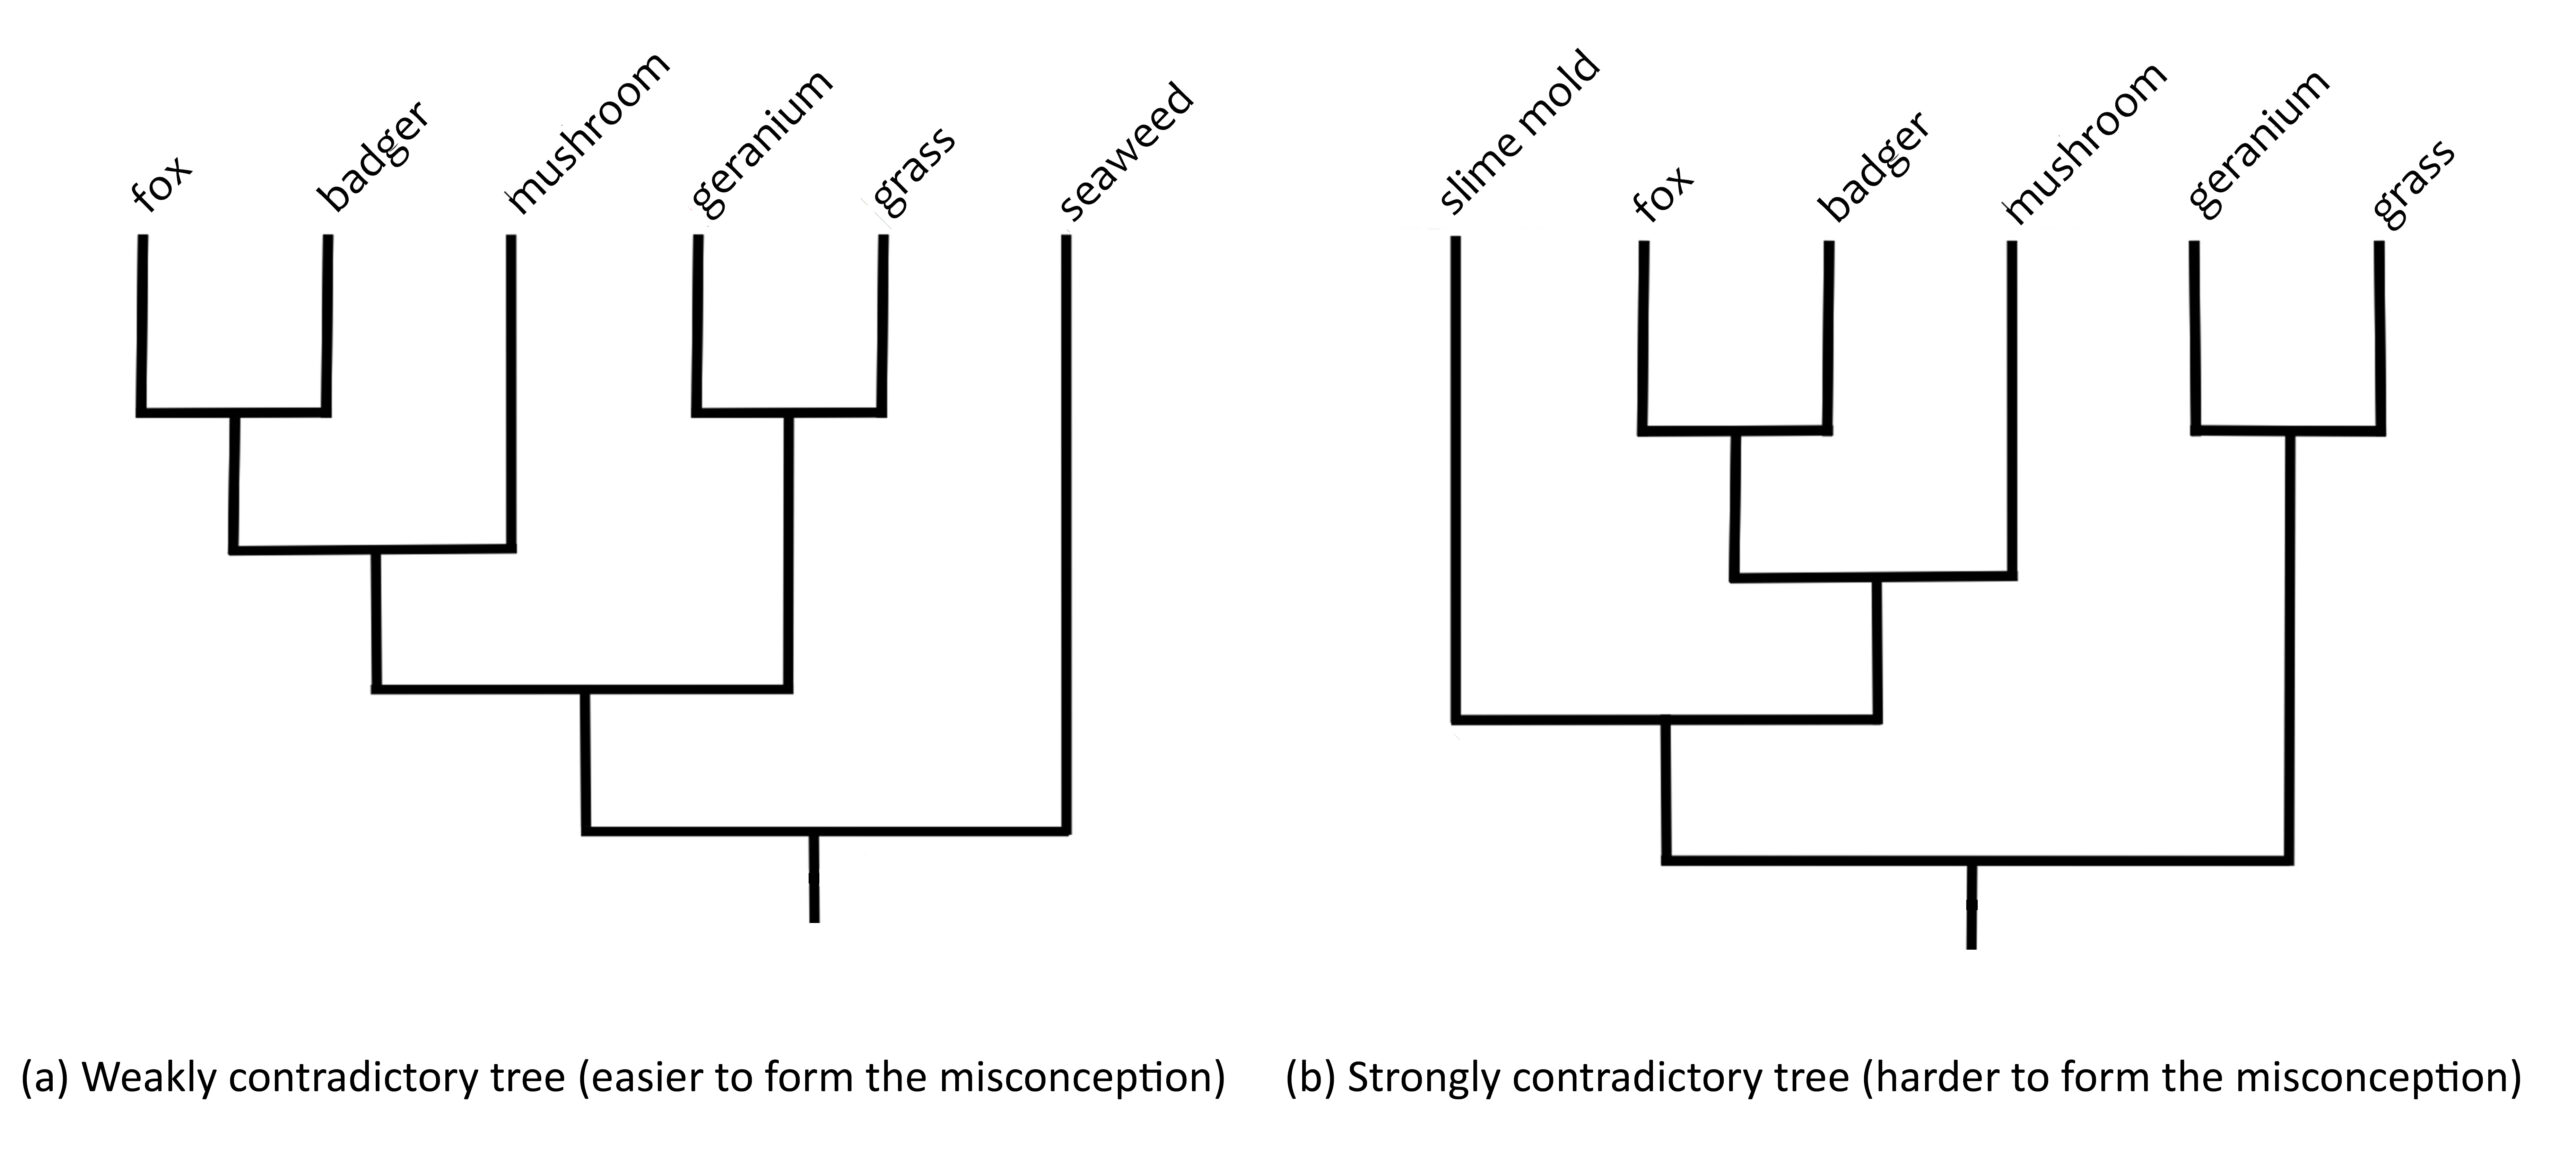 Cladogram showing two different ways to show the same relationships